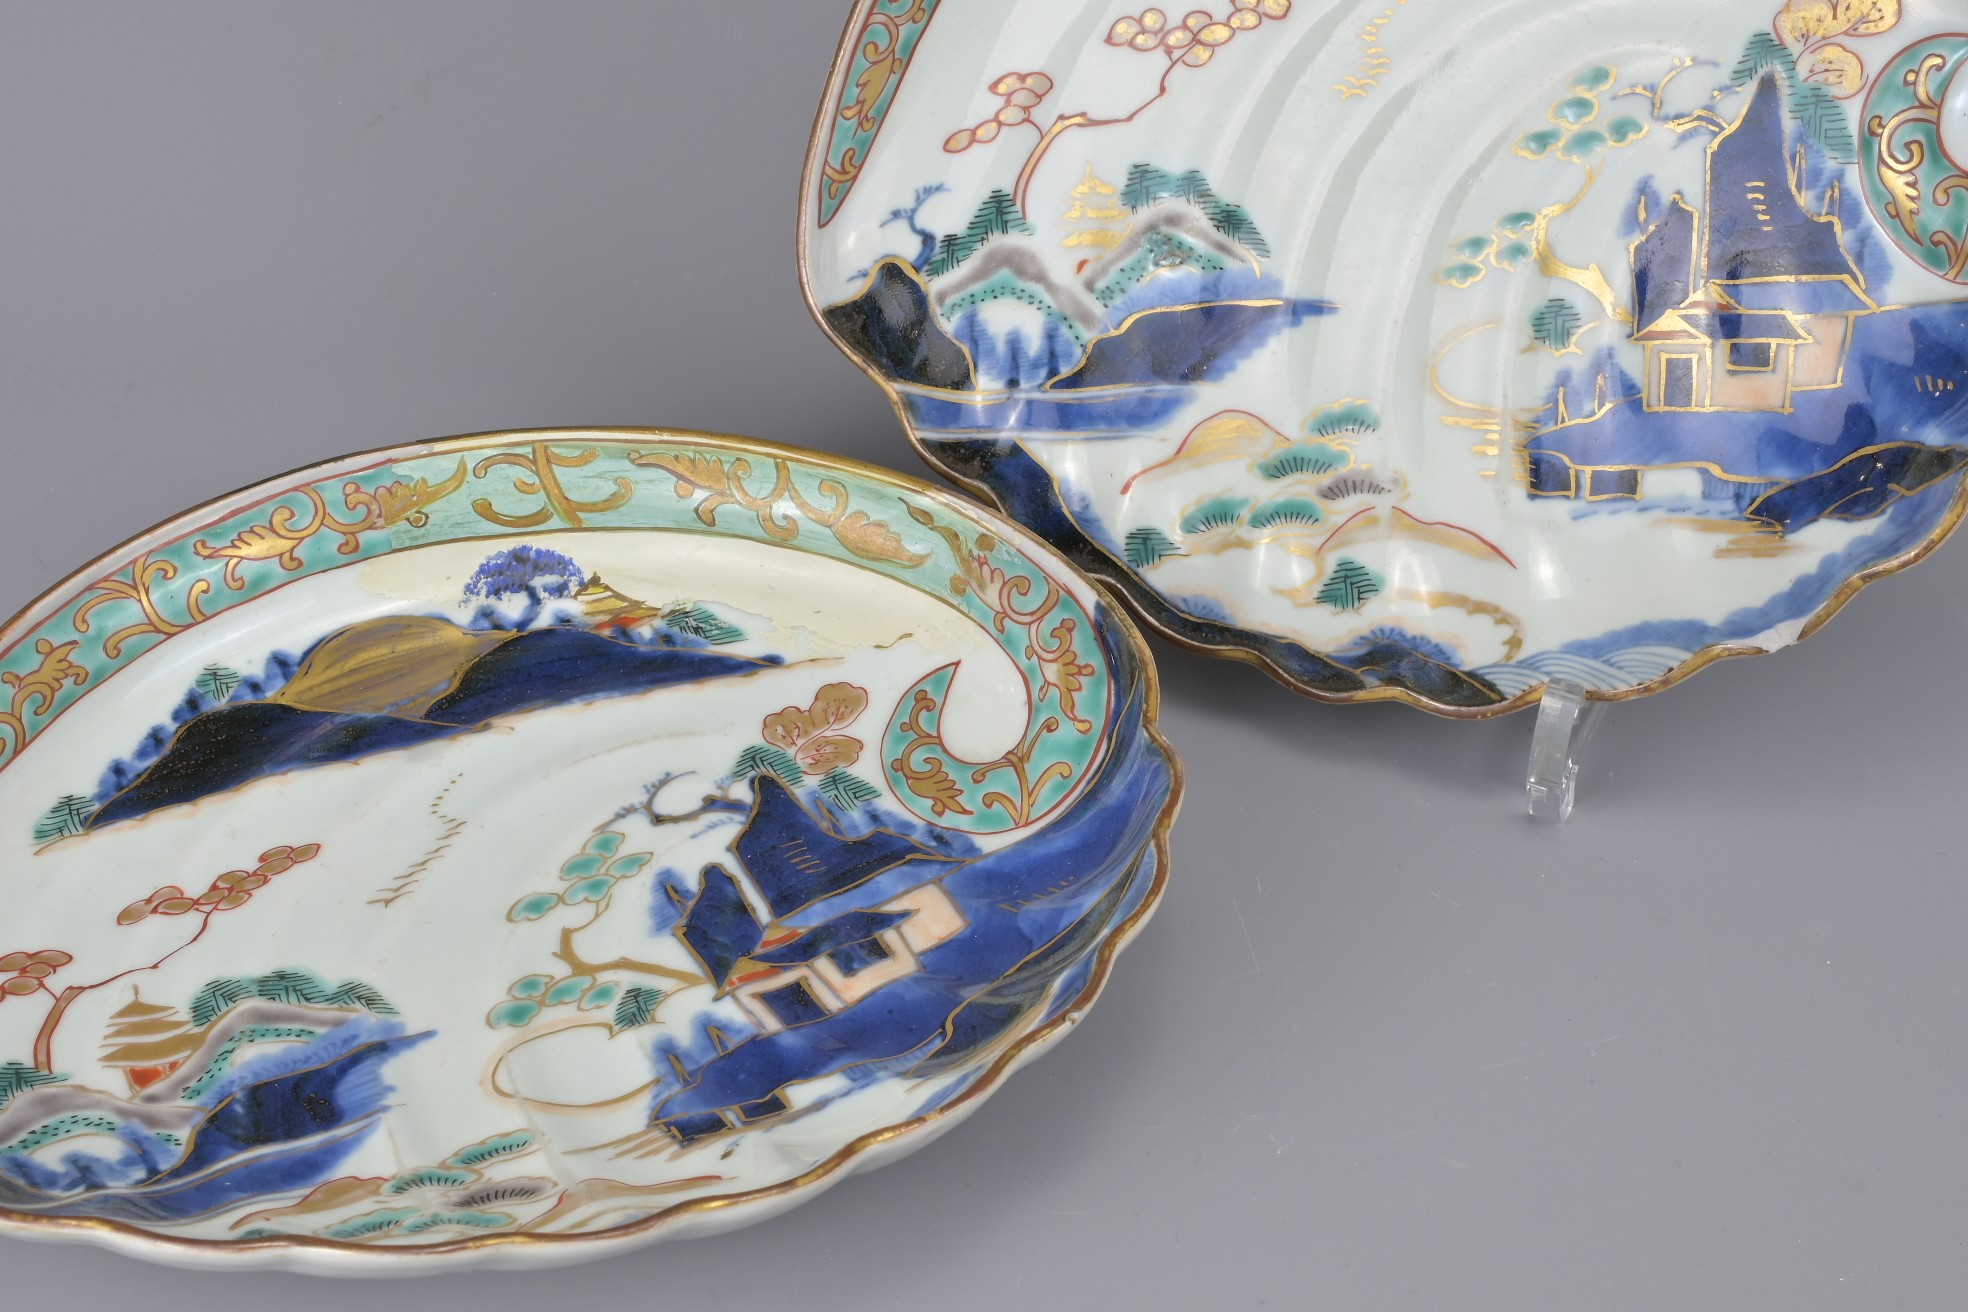 A PAIR OF JAPANESE ARITA PORCELAIN DISHES, 18/19TH CENTURY. Abalone shell form decorated with - Image 2 of 6